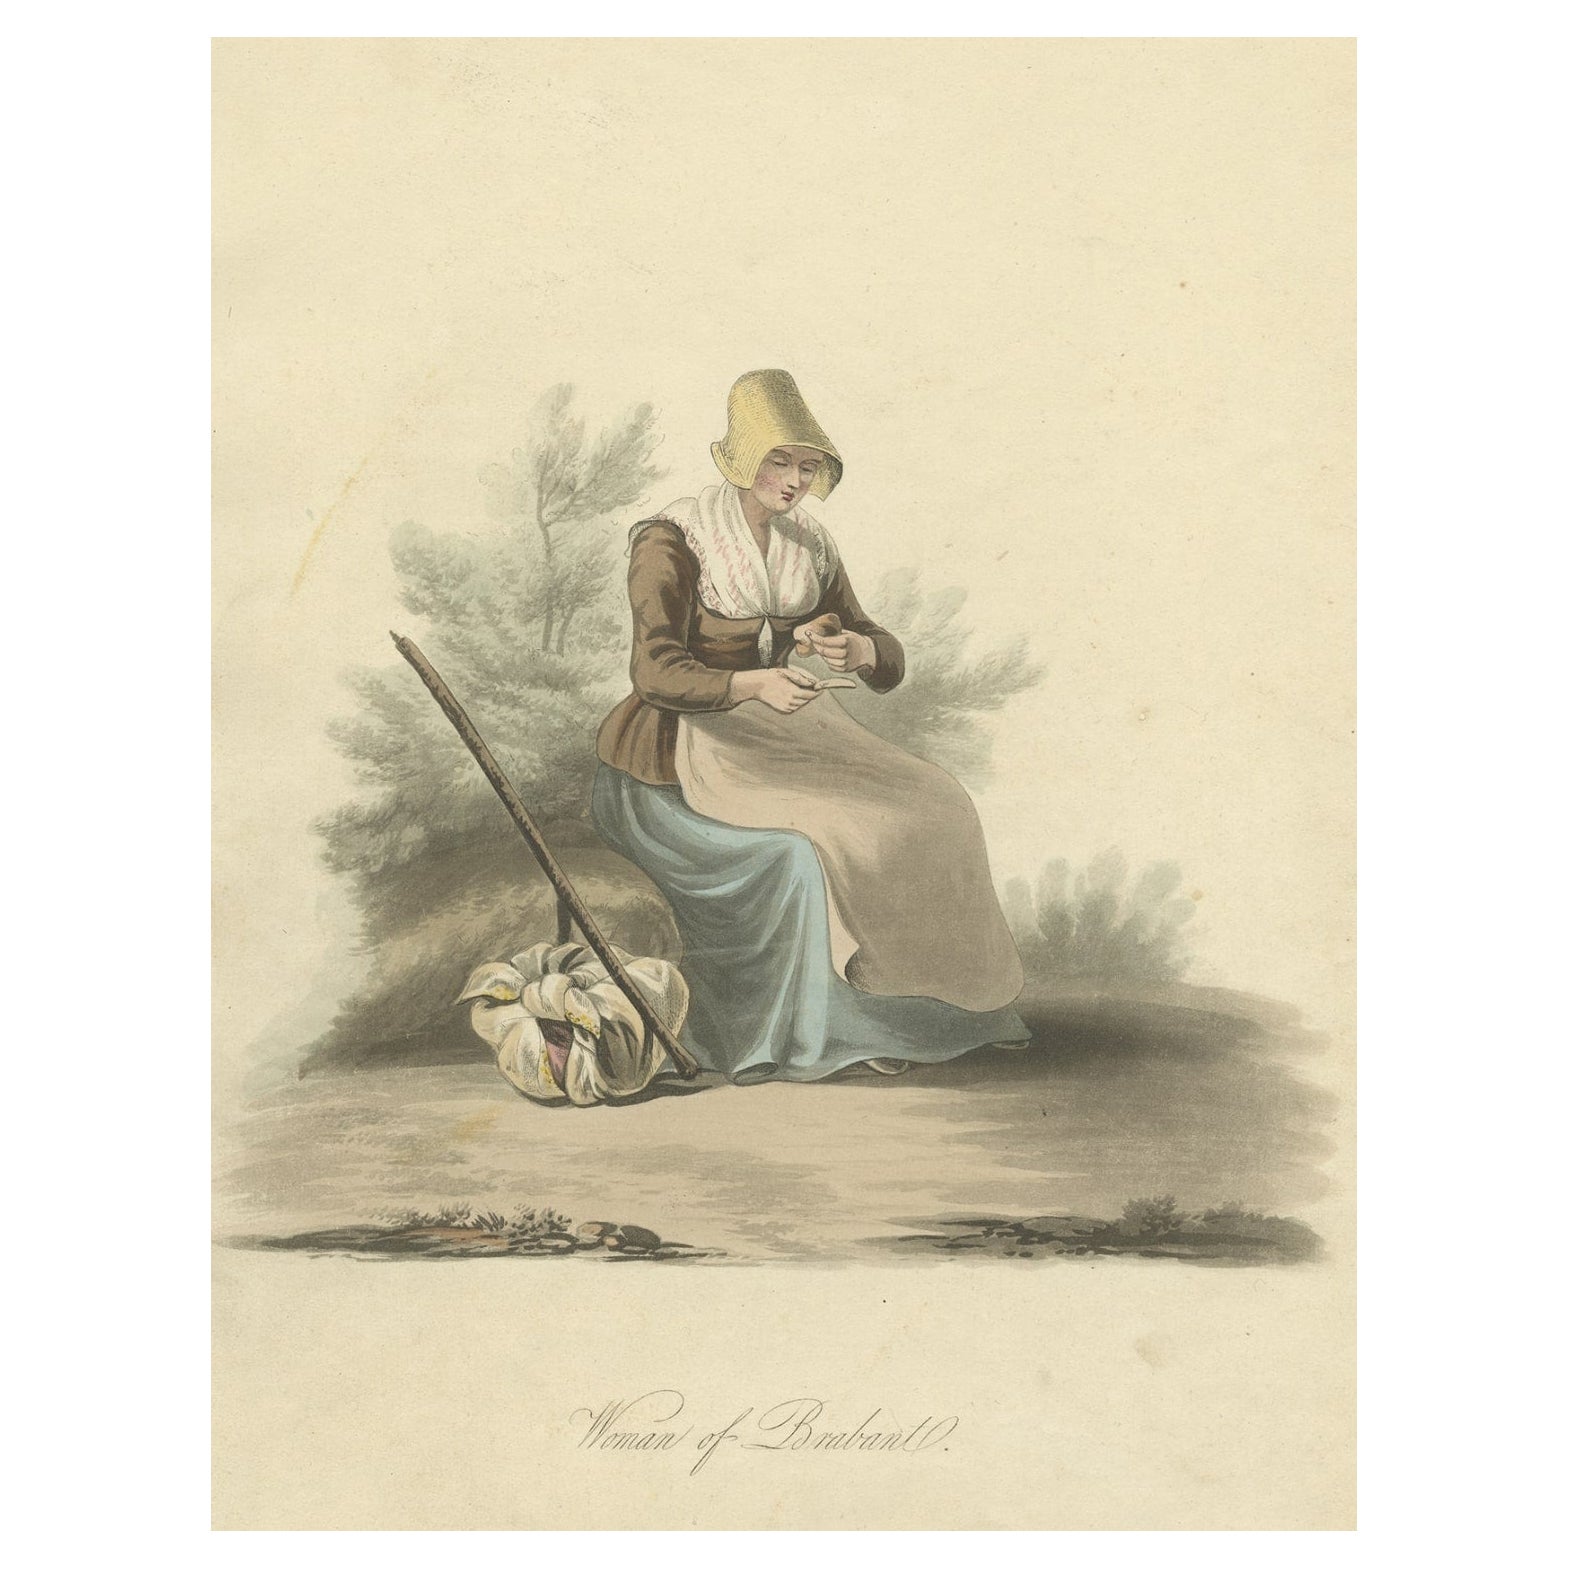 Antique Handcolored Engraving of a Woman of Brabant, the Netherlands, 1817